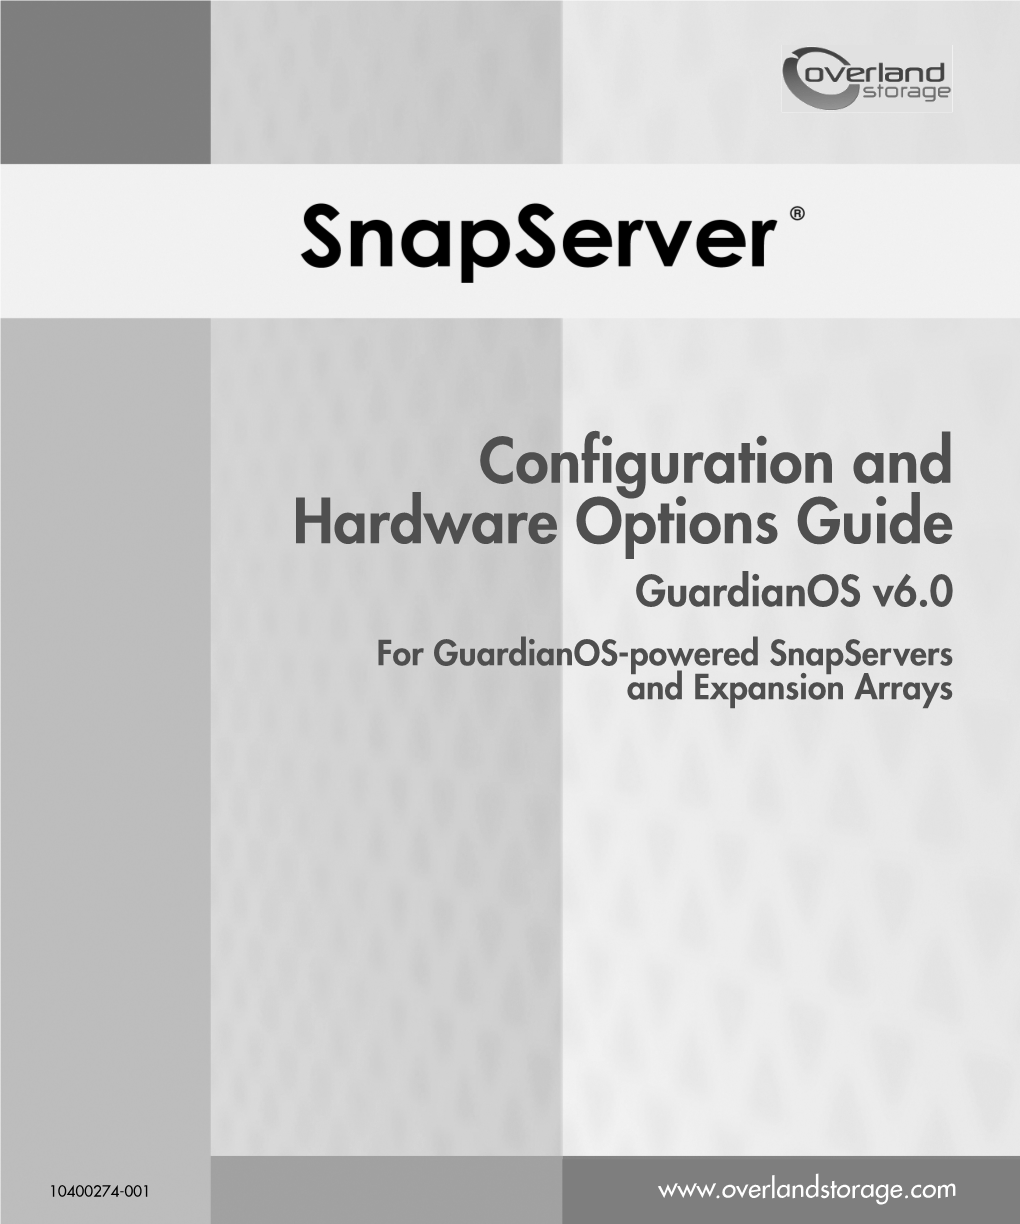 Configuration and Hardware Options Guide Guardianos V6.0 for Guardianos-Powered Snapservers and Expansion Arrays